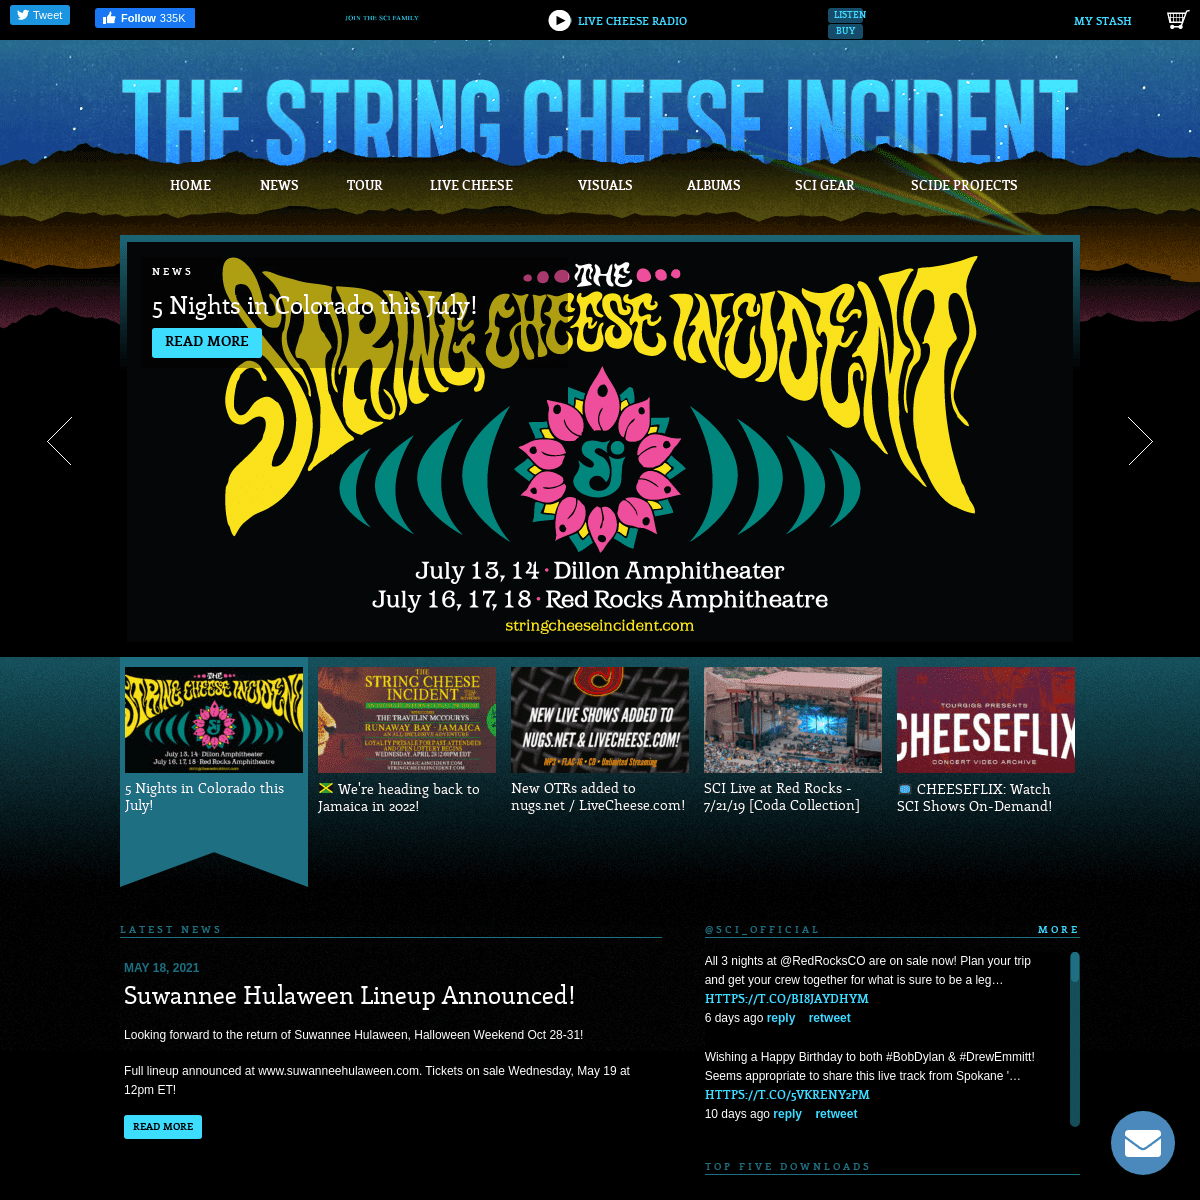 A complete backup of https://stringcheeseincident.com